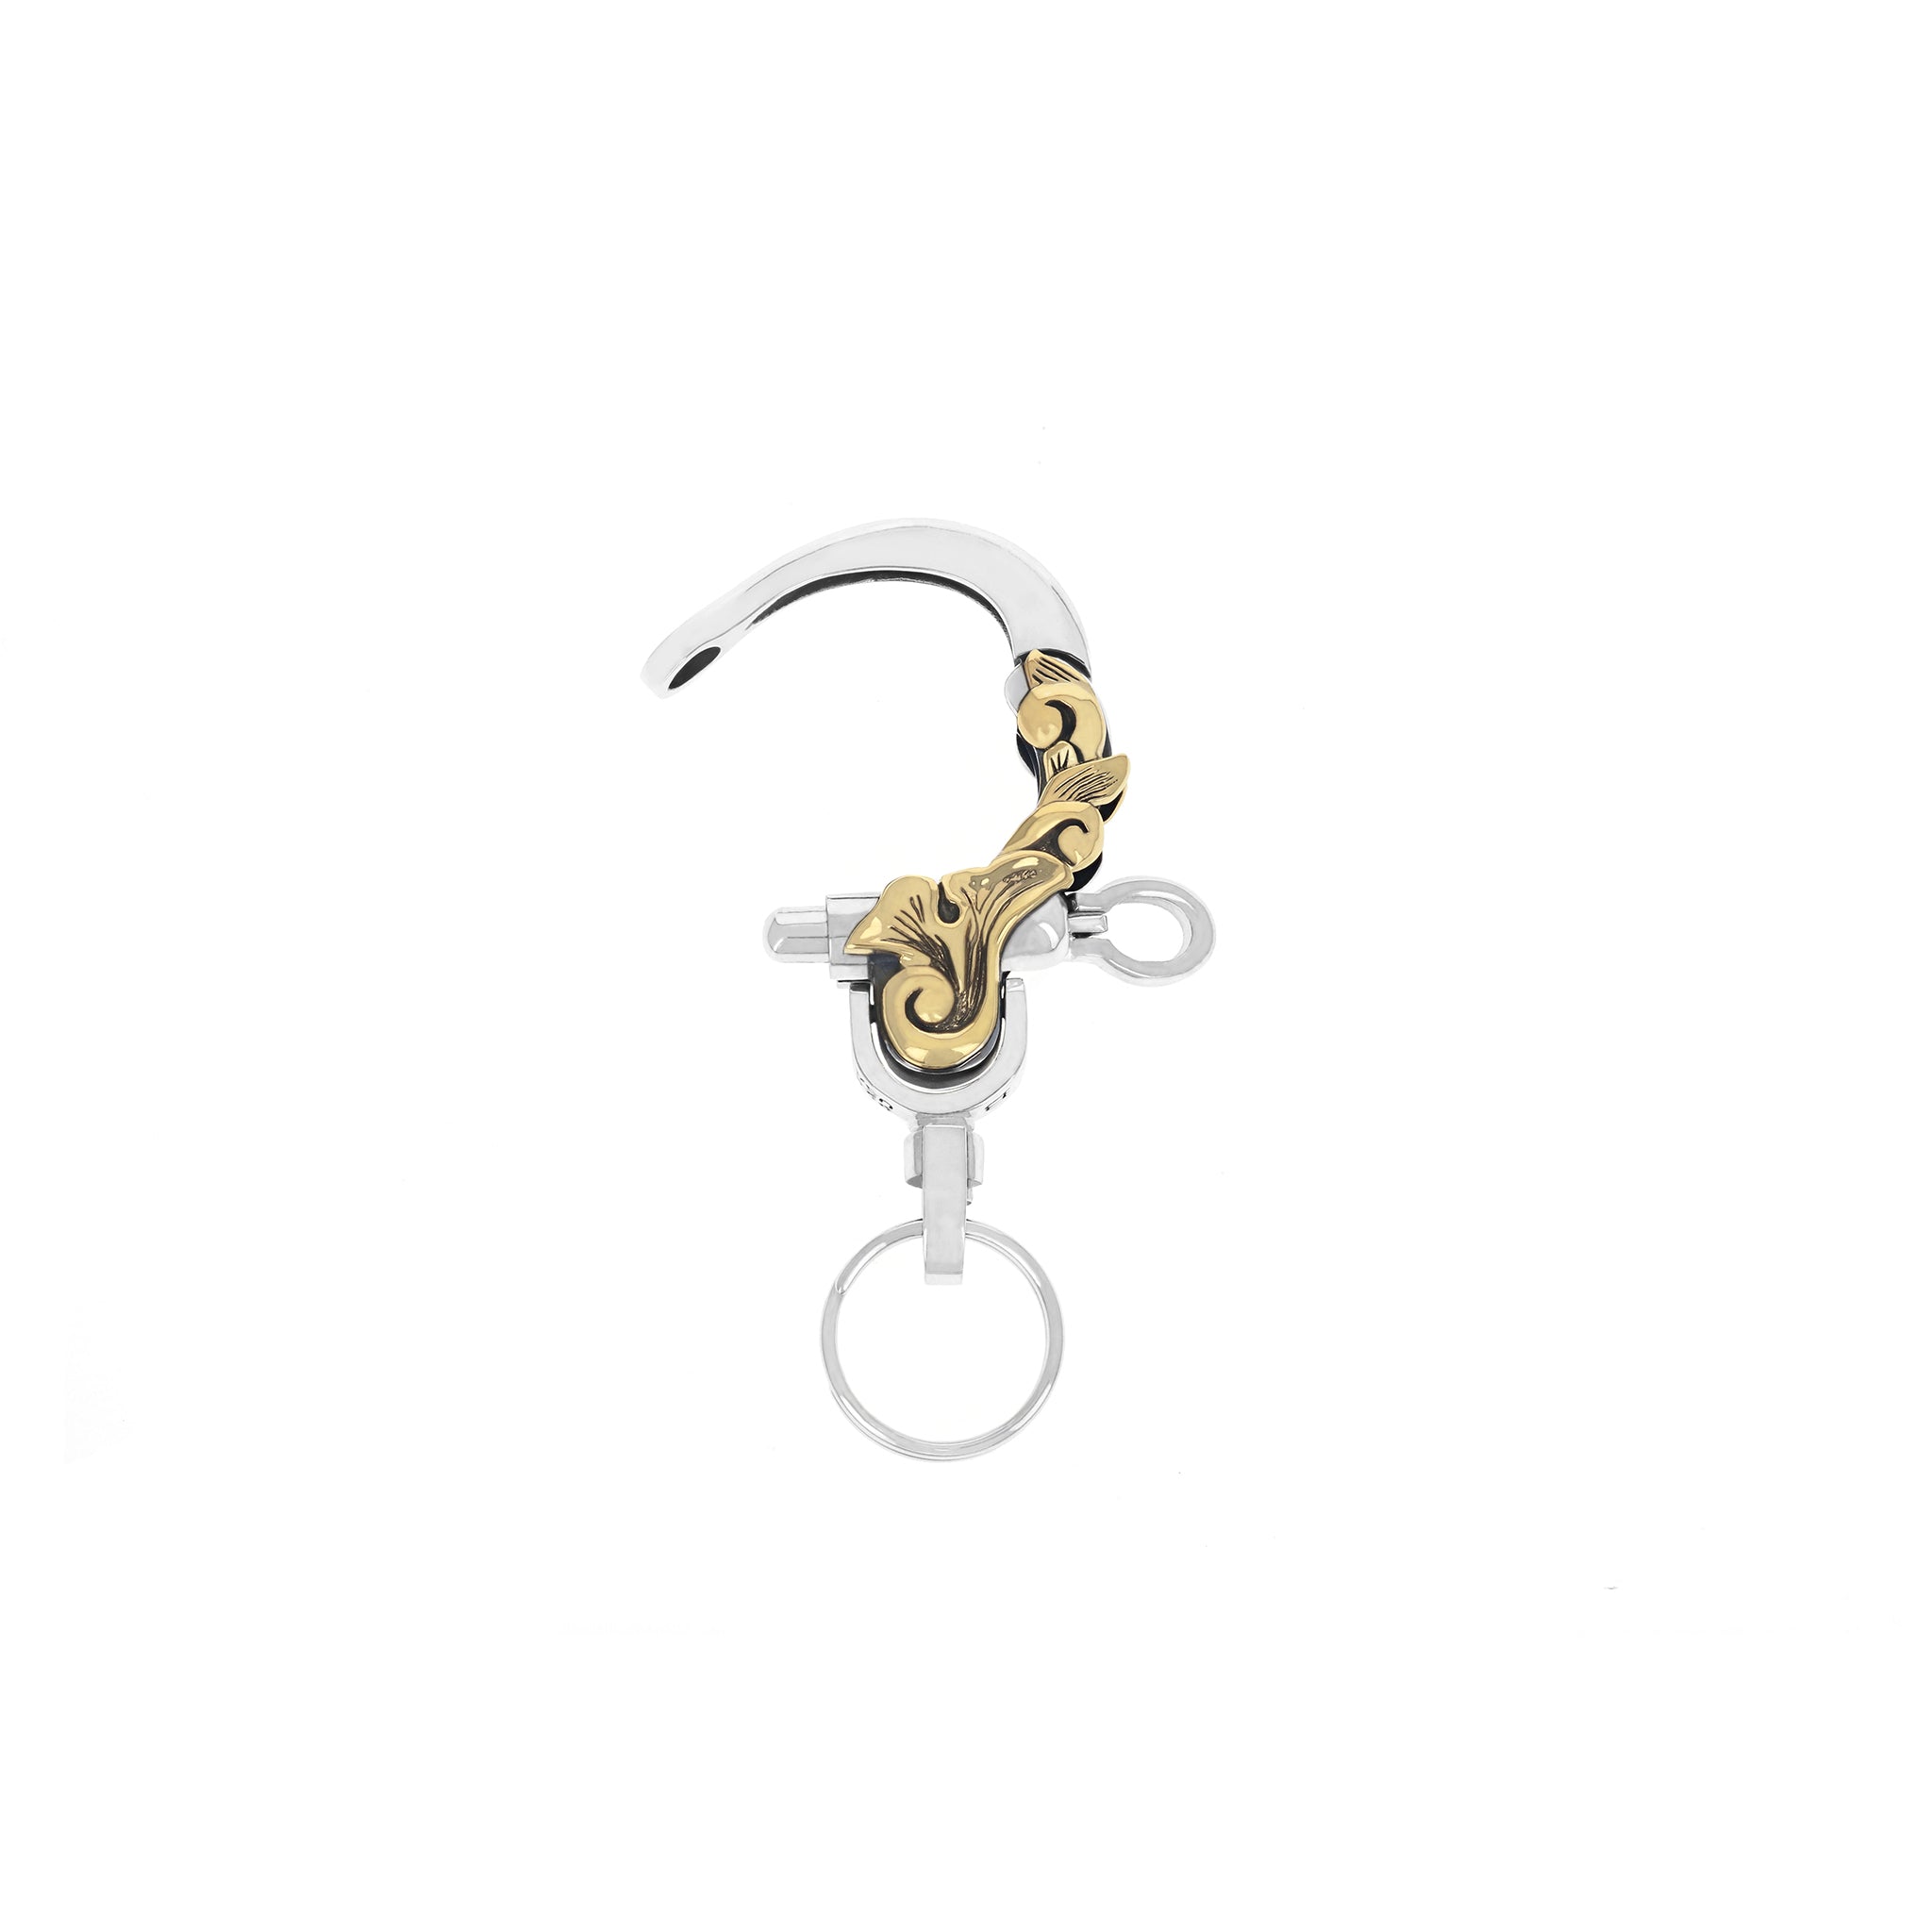 Key Fob with Gold Alloy Scroll Design